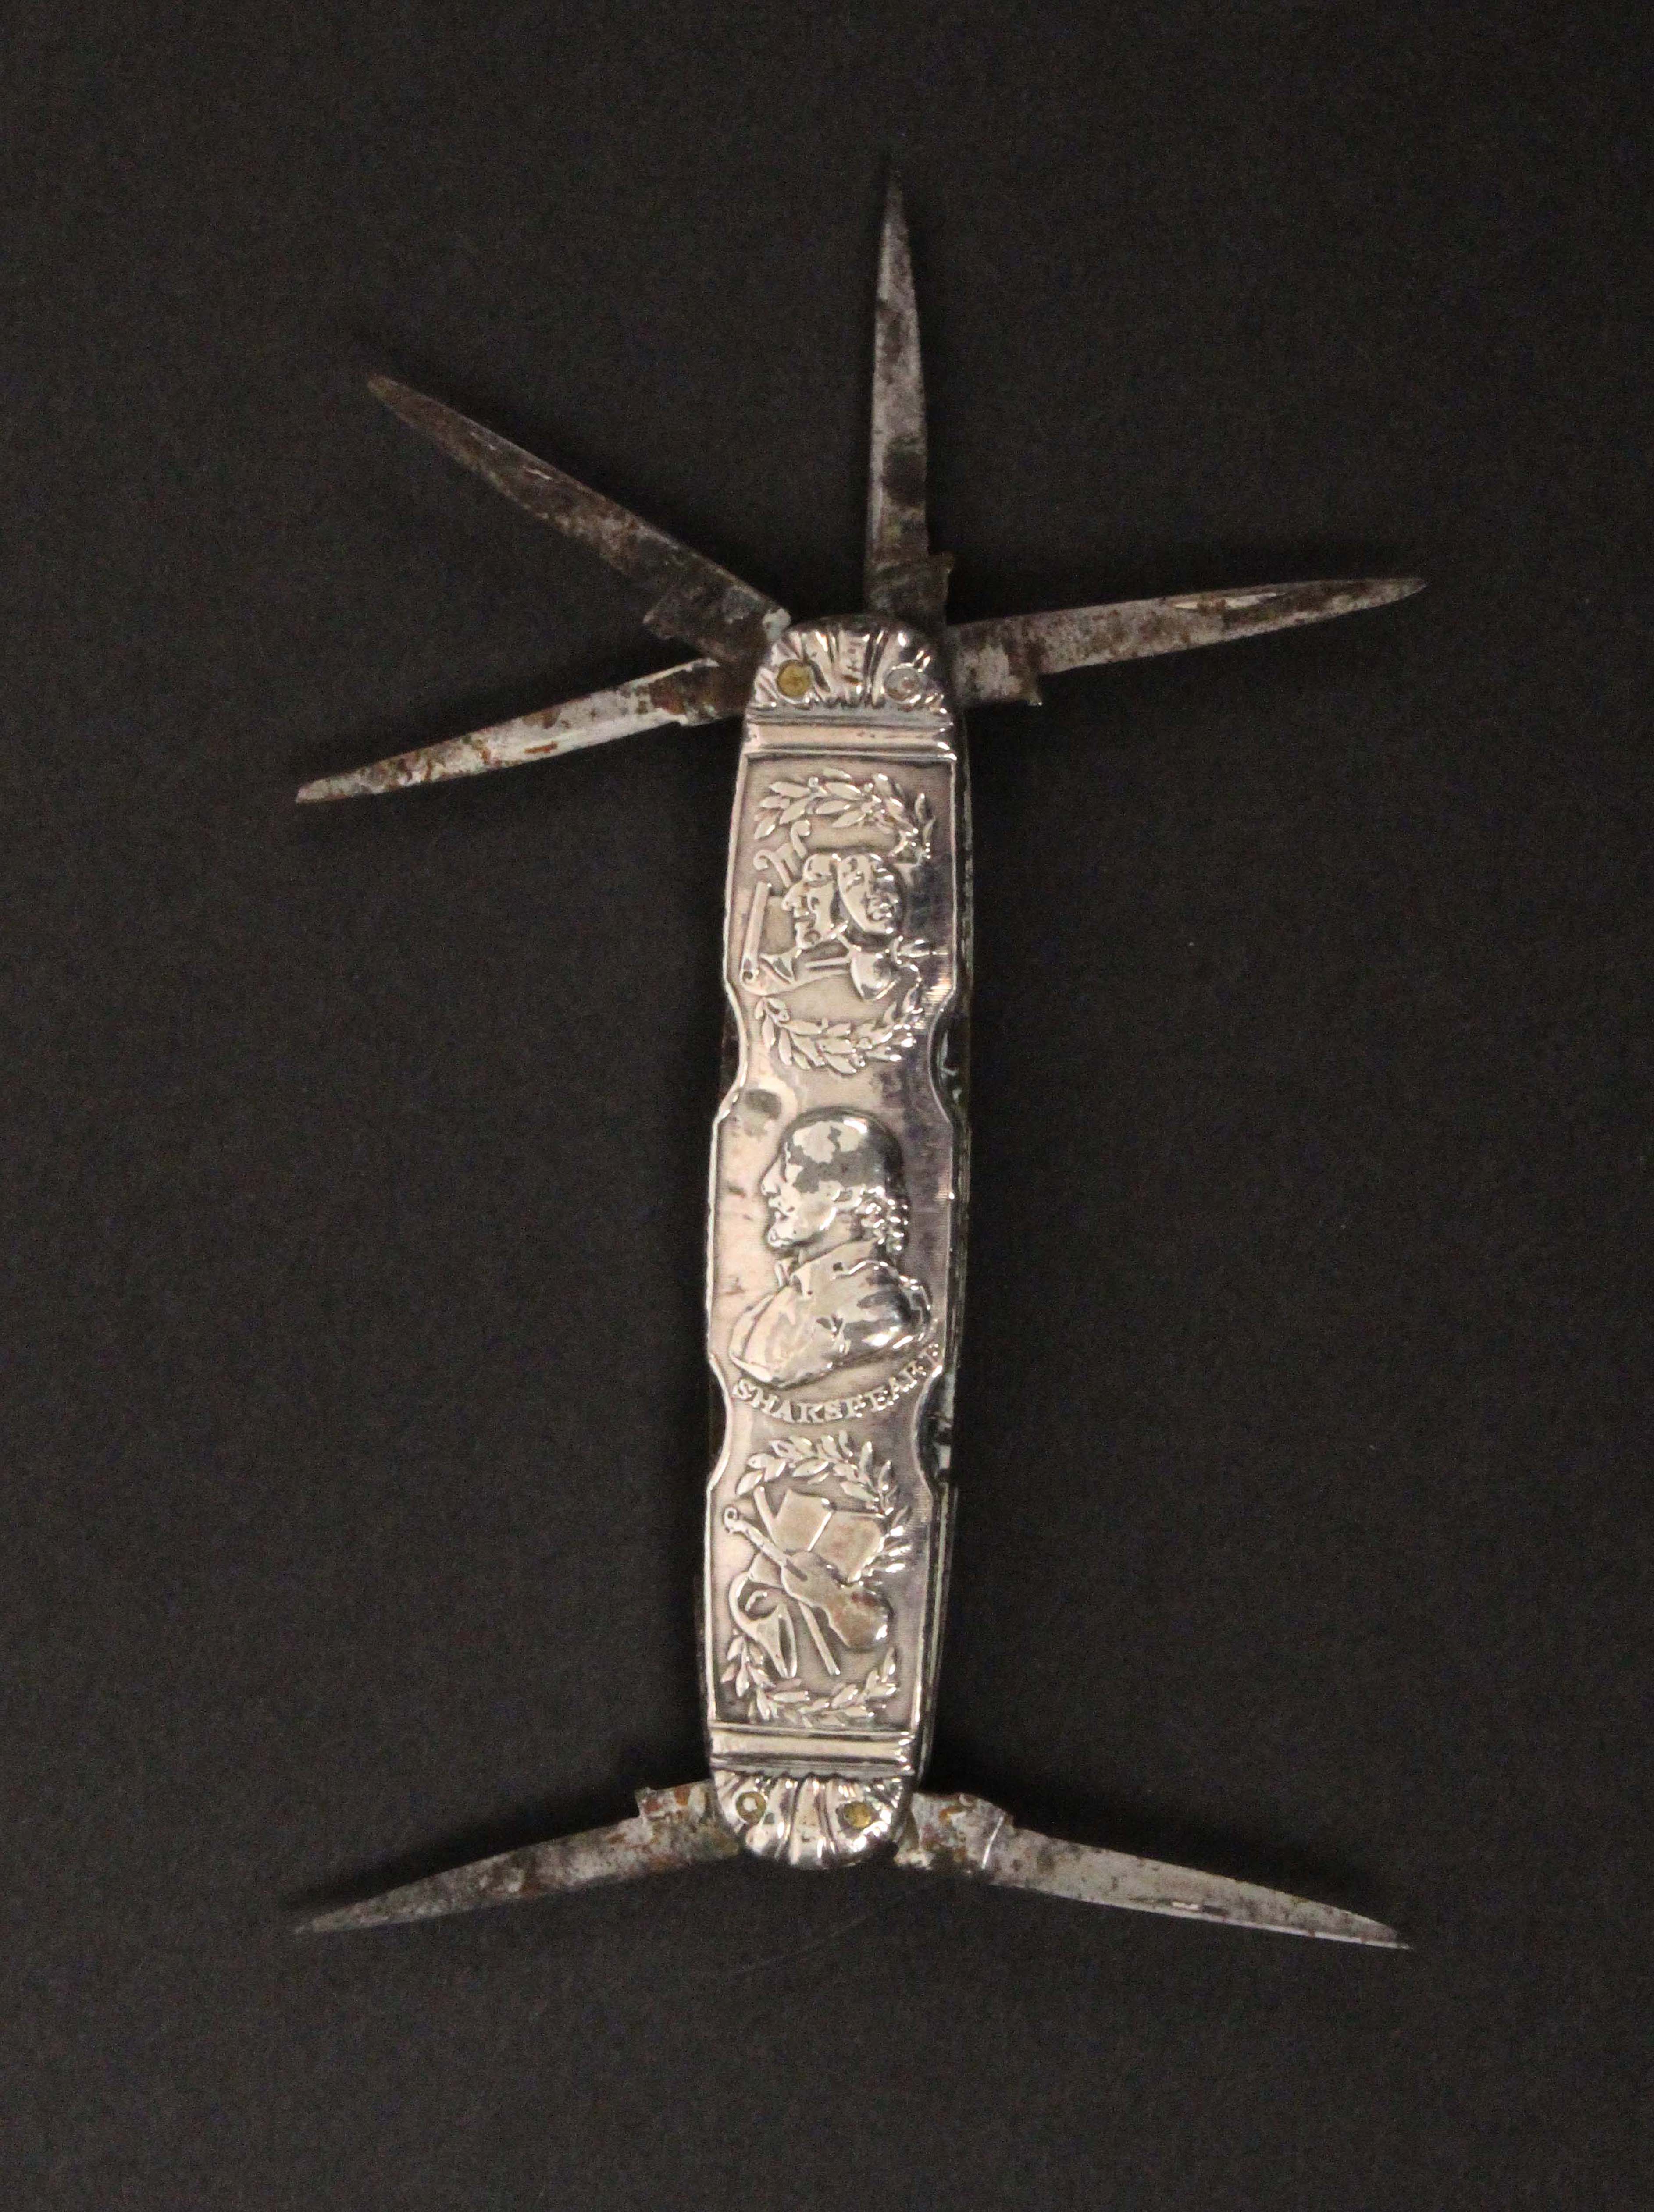 A late 18th century pocket knife commemorating Shakespeare probably produced for David Garrick’s - Image 2 of 2